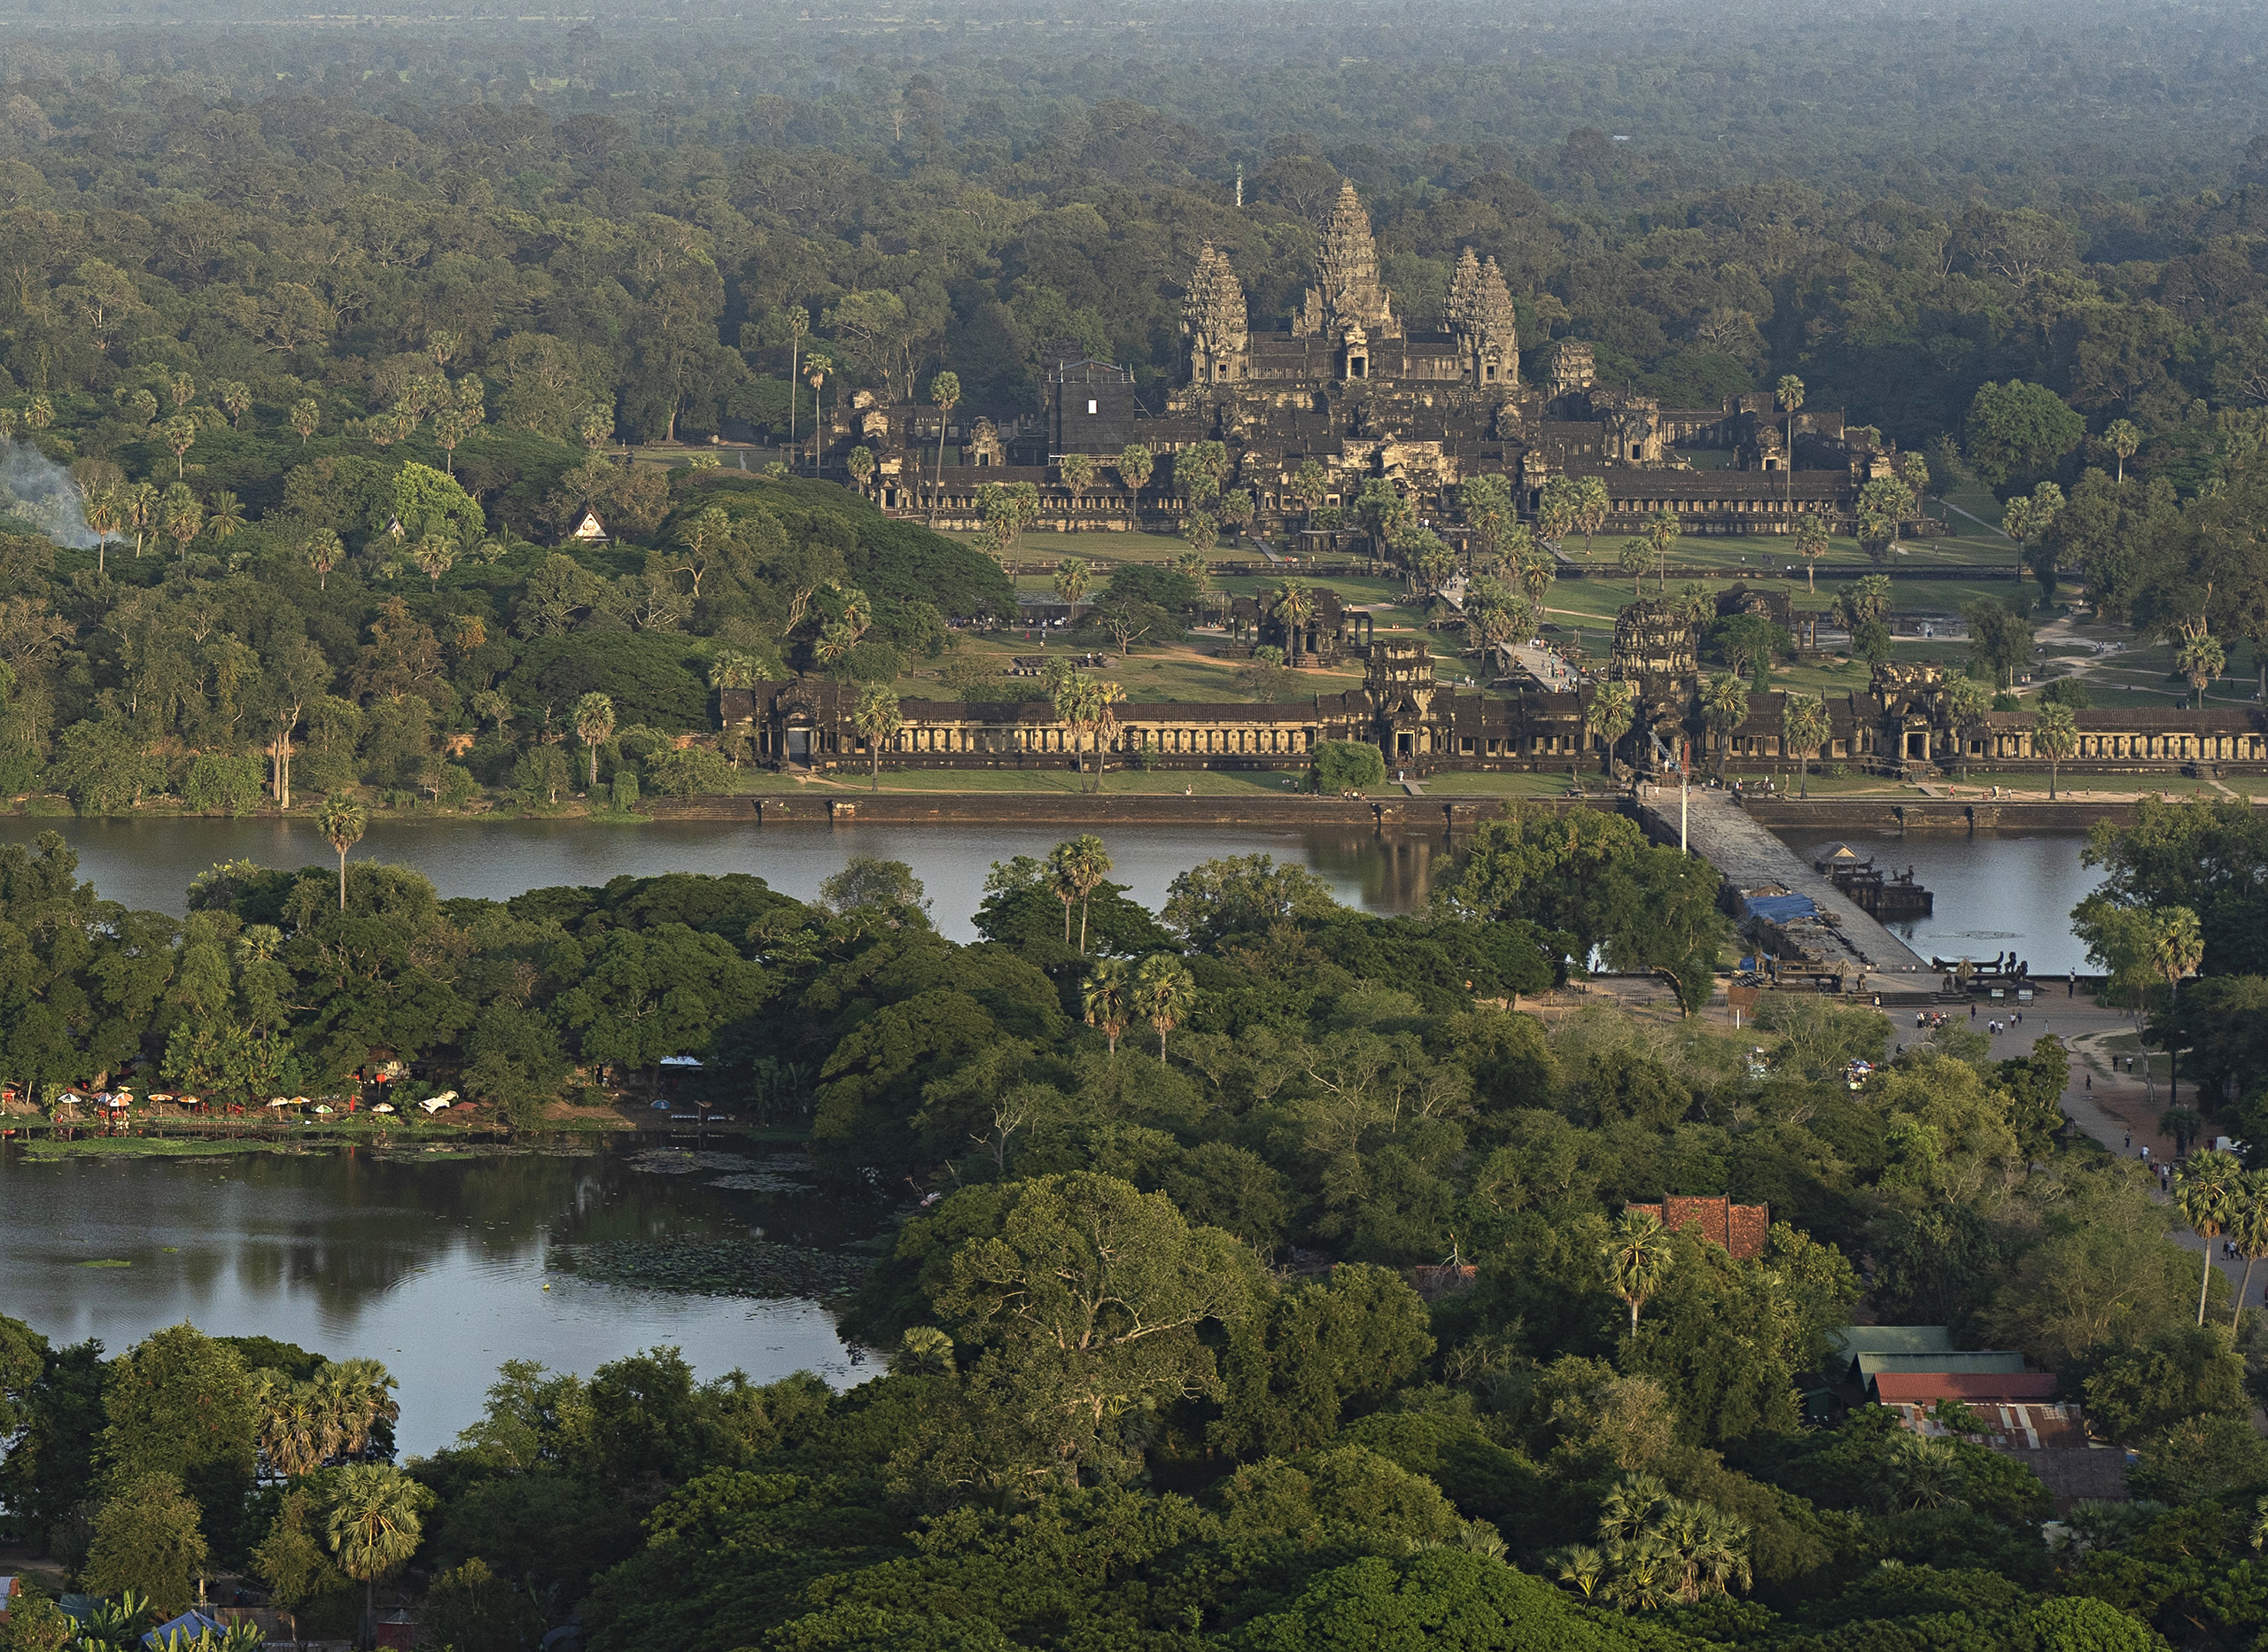 AW, main temple from balloon